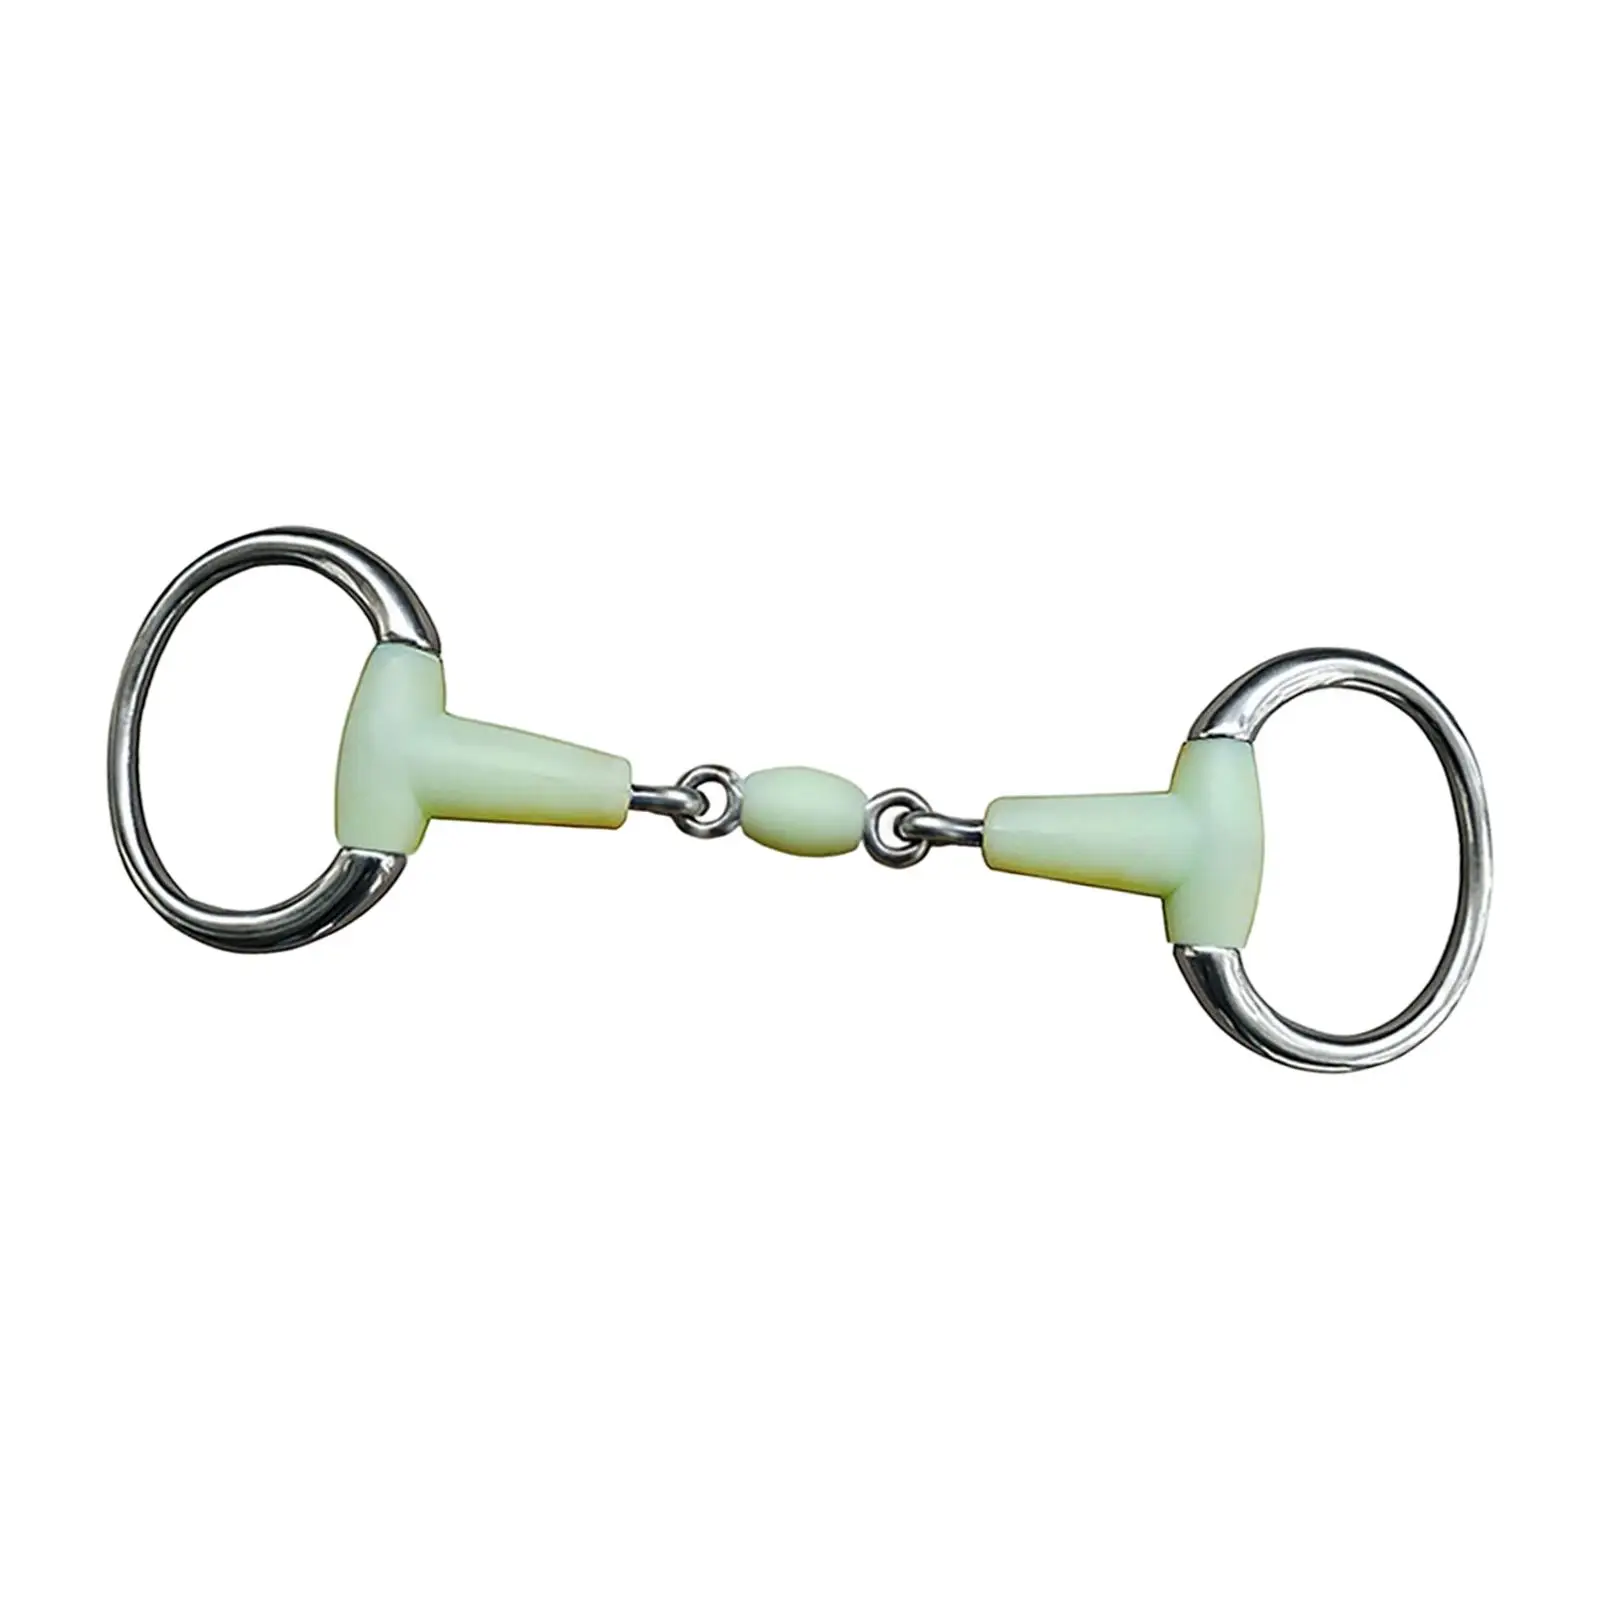 Ultralight Horse Bit Equestrian Accessories for Horse Riding